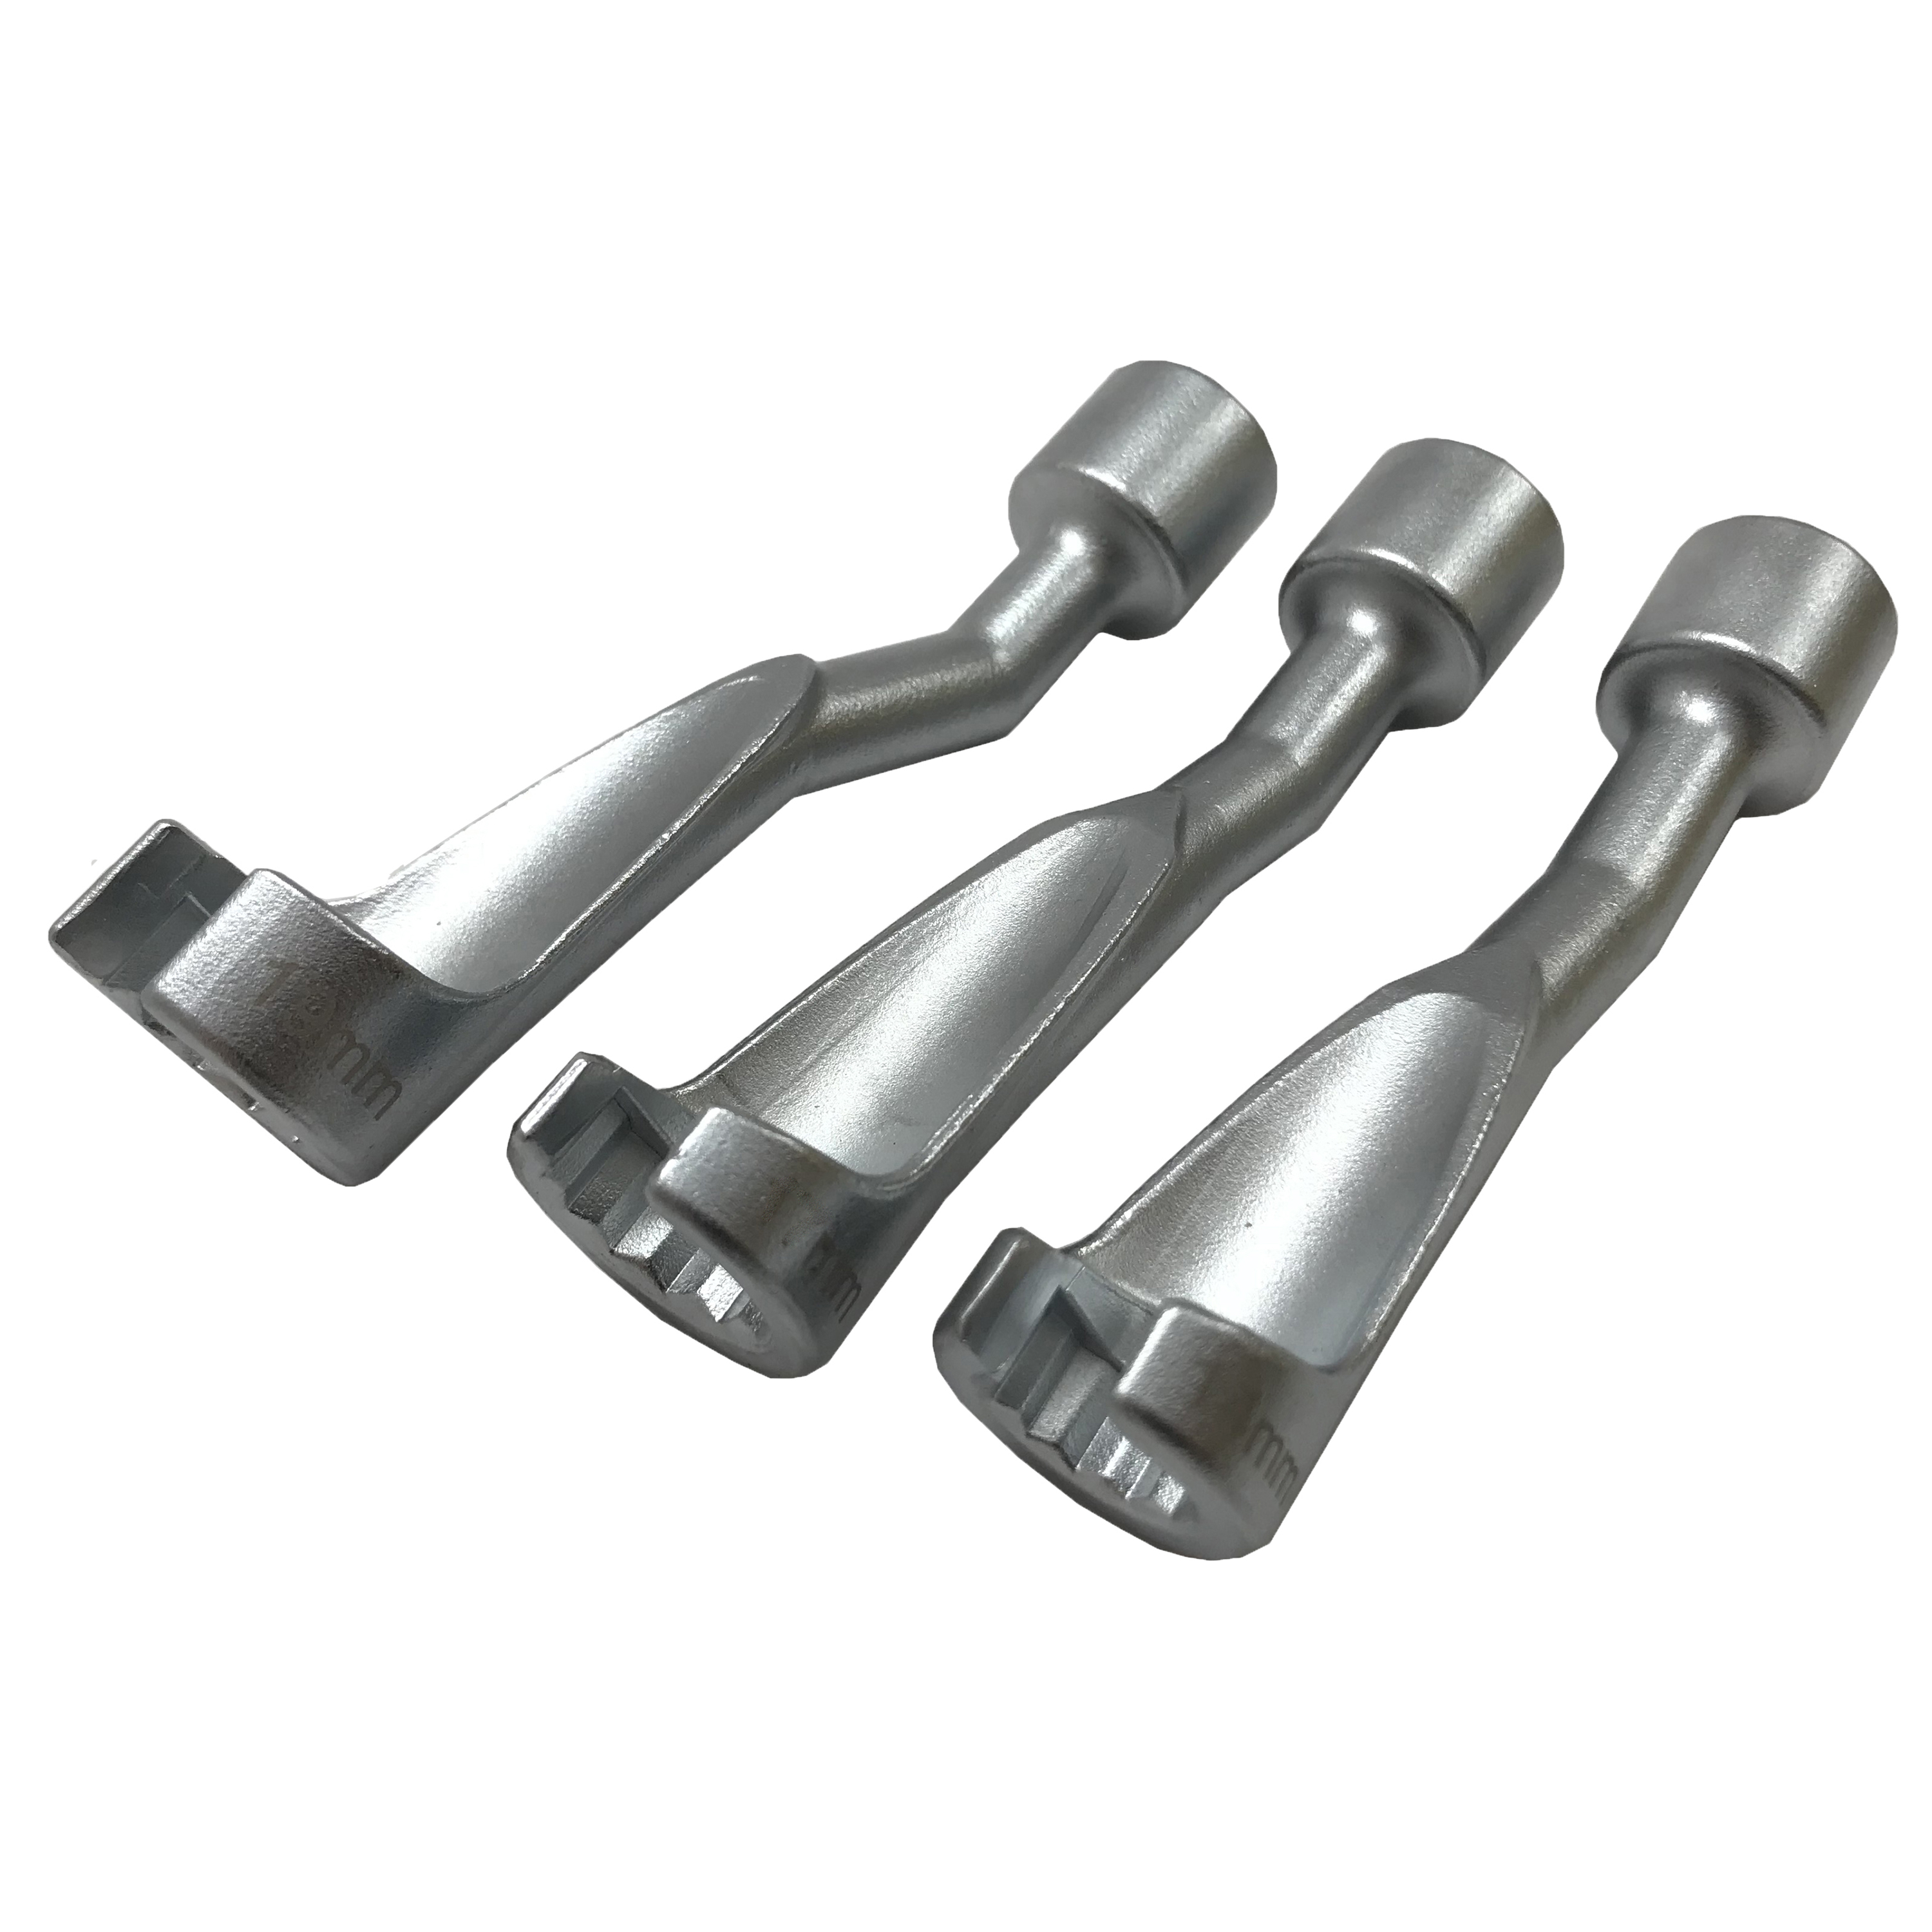 CTA - 3 PC. INJECTOR WRENCH SET -  2220